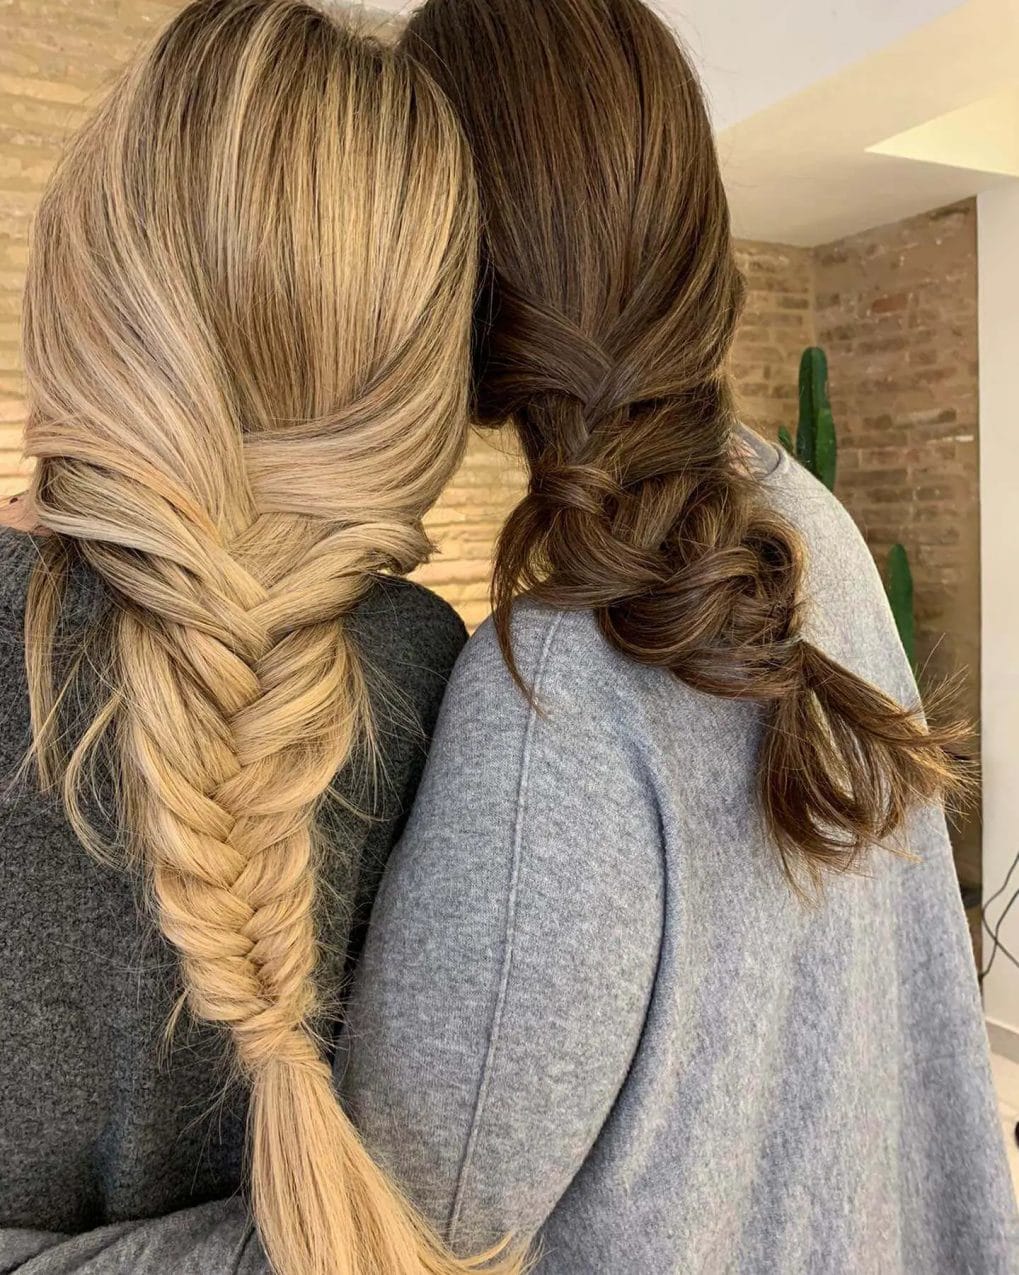 Left with a honey blonde fishtail, right with traditional chocolate braid, both ponytails.